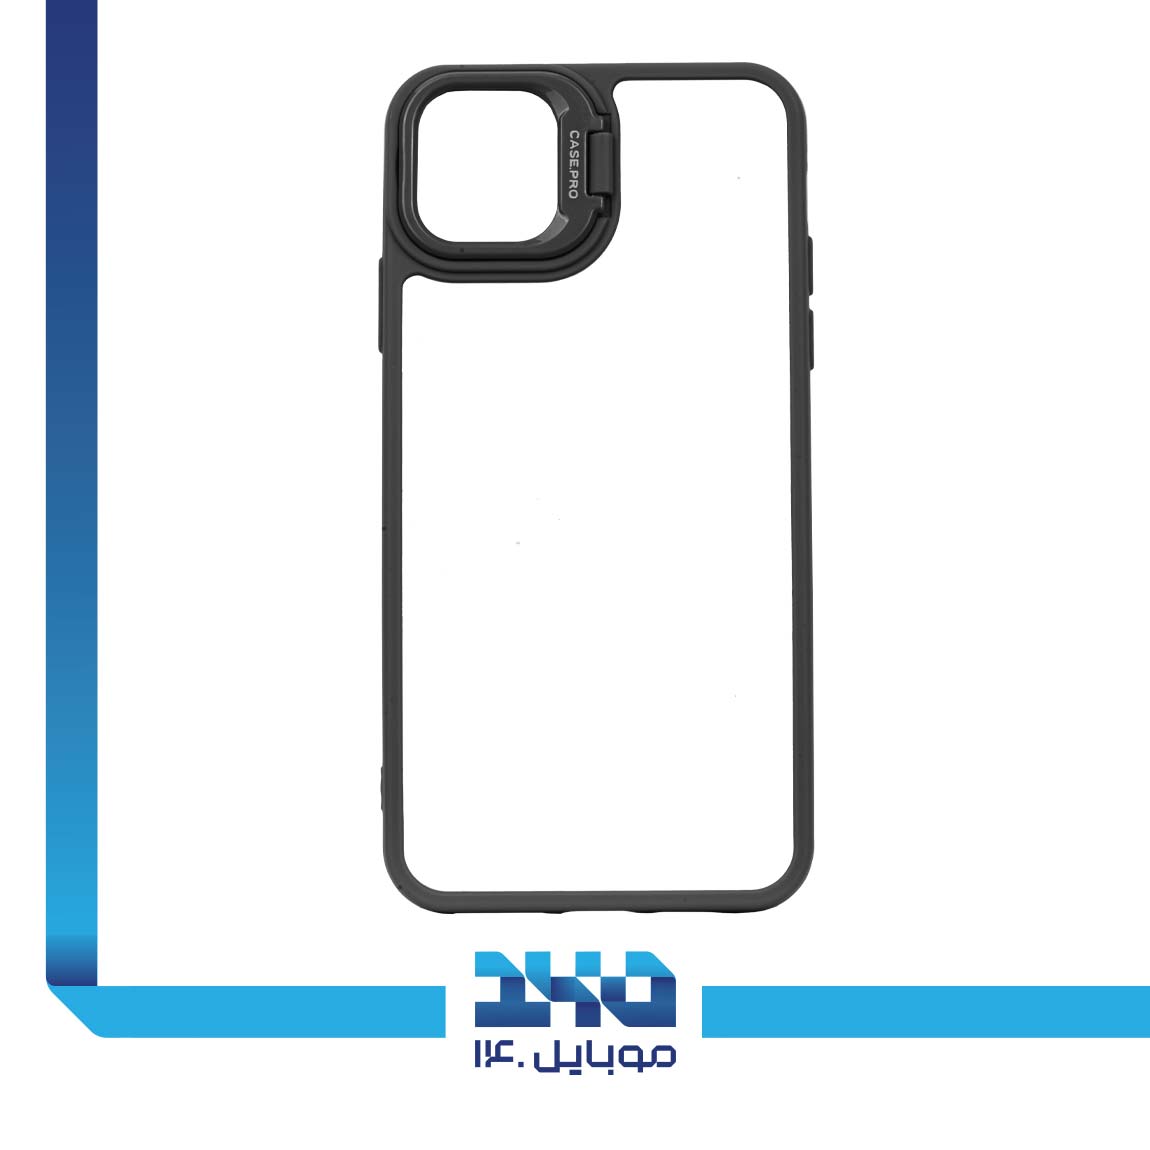  Holder Case For iPhone 11 Pro Max 1